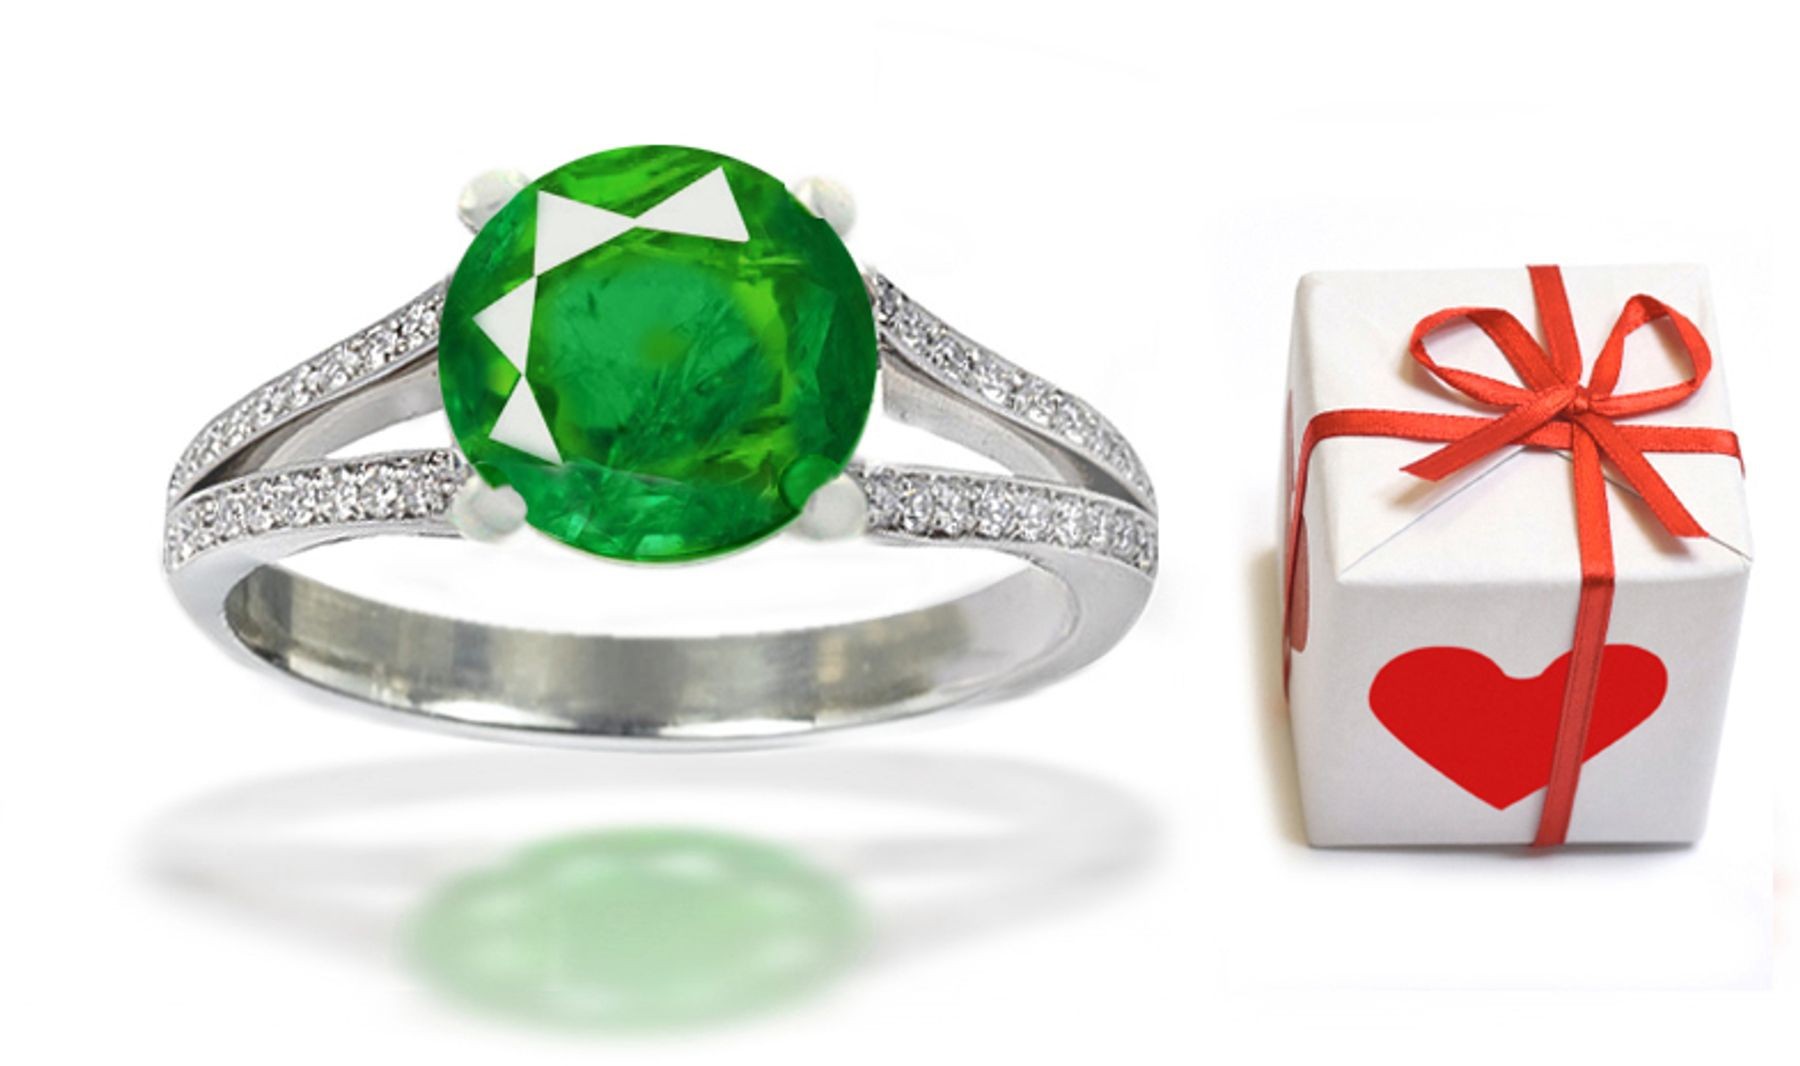 Spectacle of Gemstones: Twisted Shank Pave Set Diamond & Center Round Emerald Ring